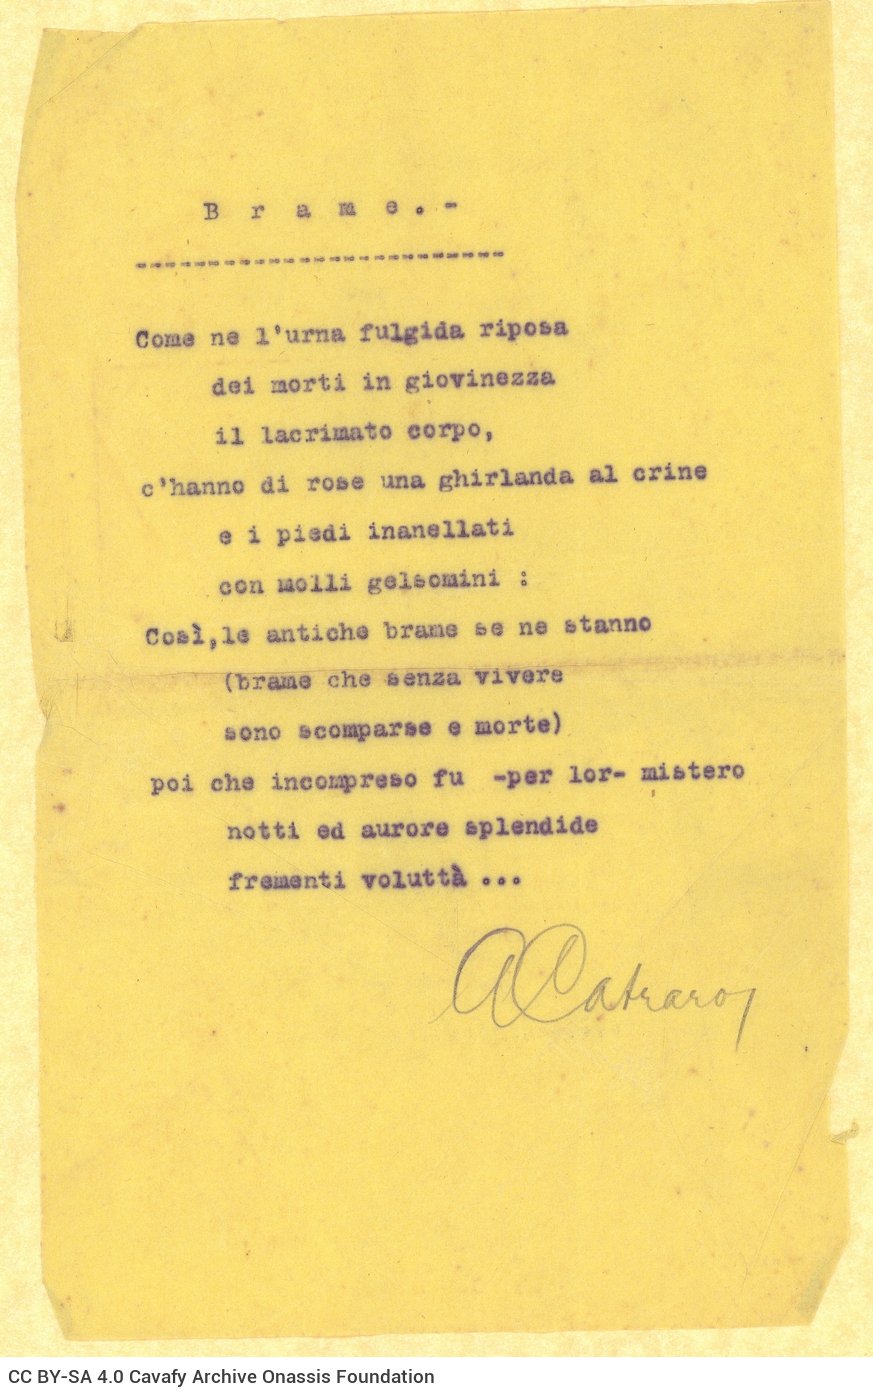 Typewritten translations of poems by Cavafy in Italian. The poems "Voices", "The City", "Desires" and "Unfaithfulness" on the